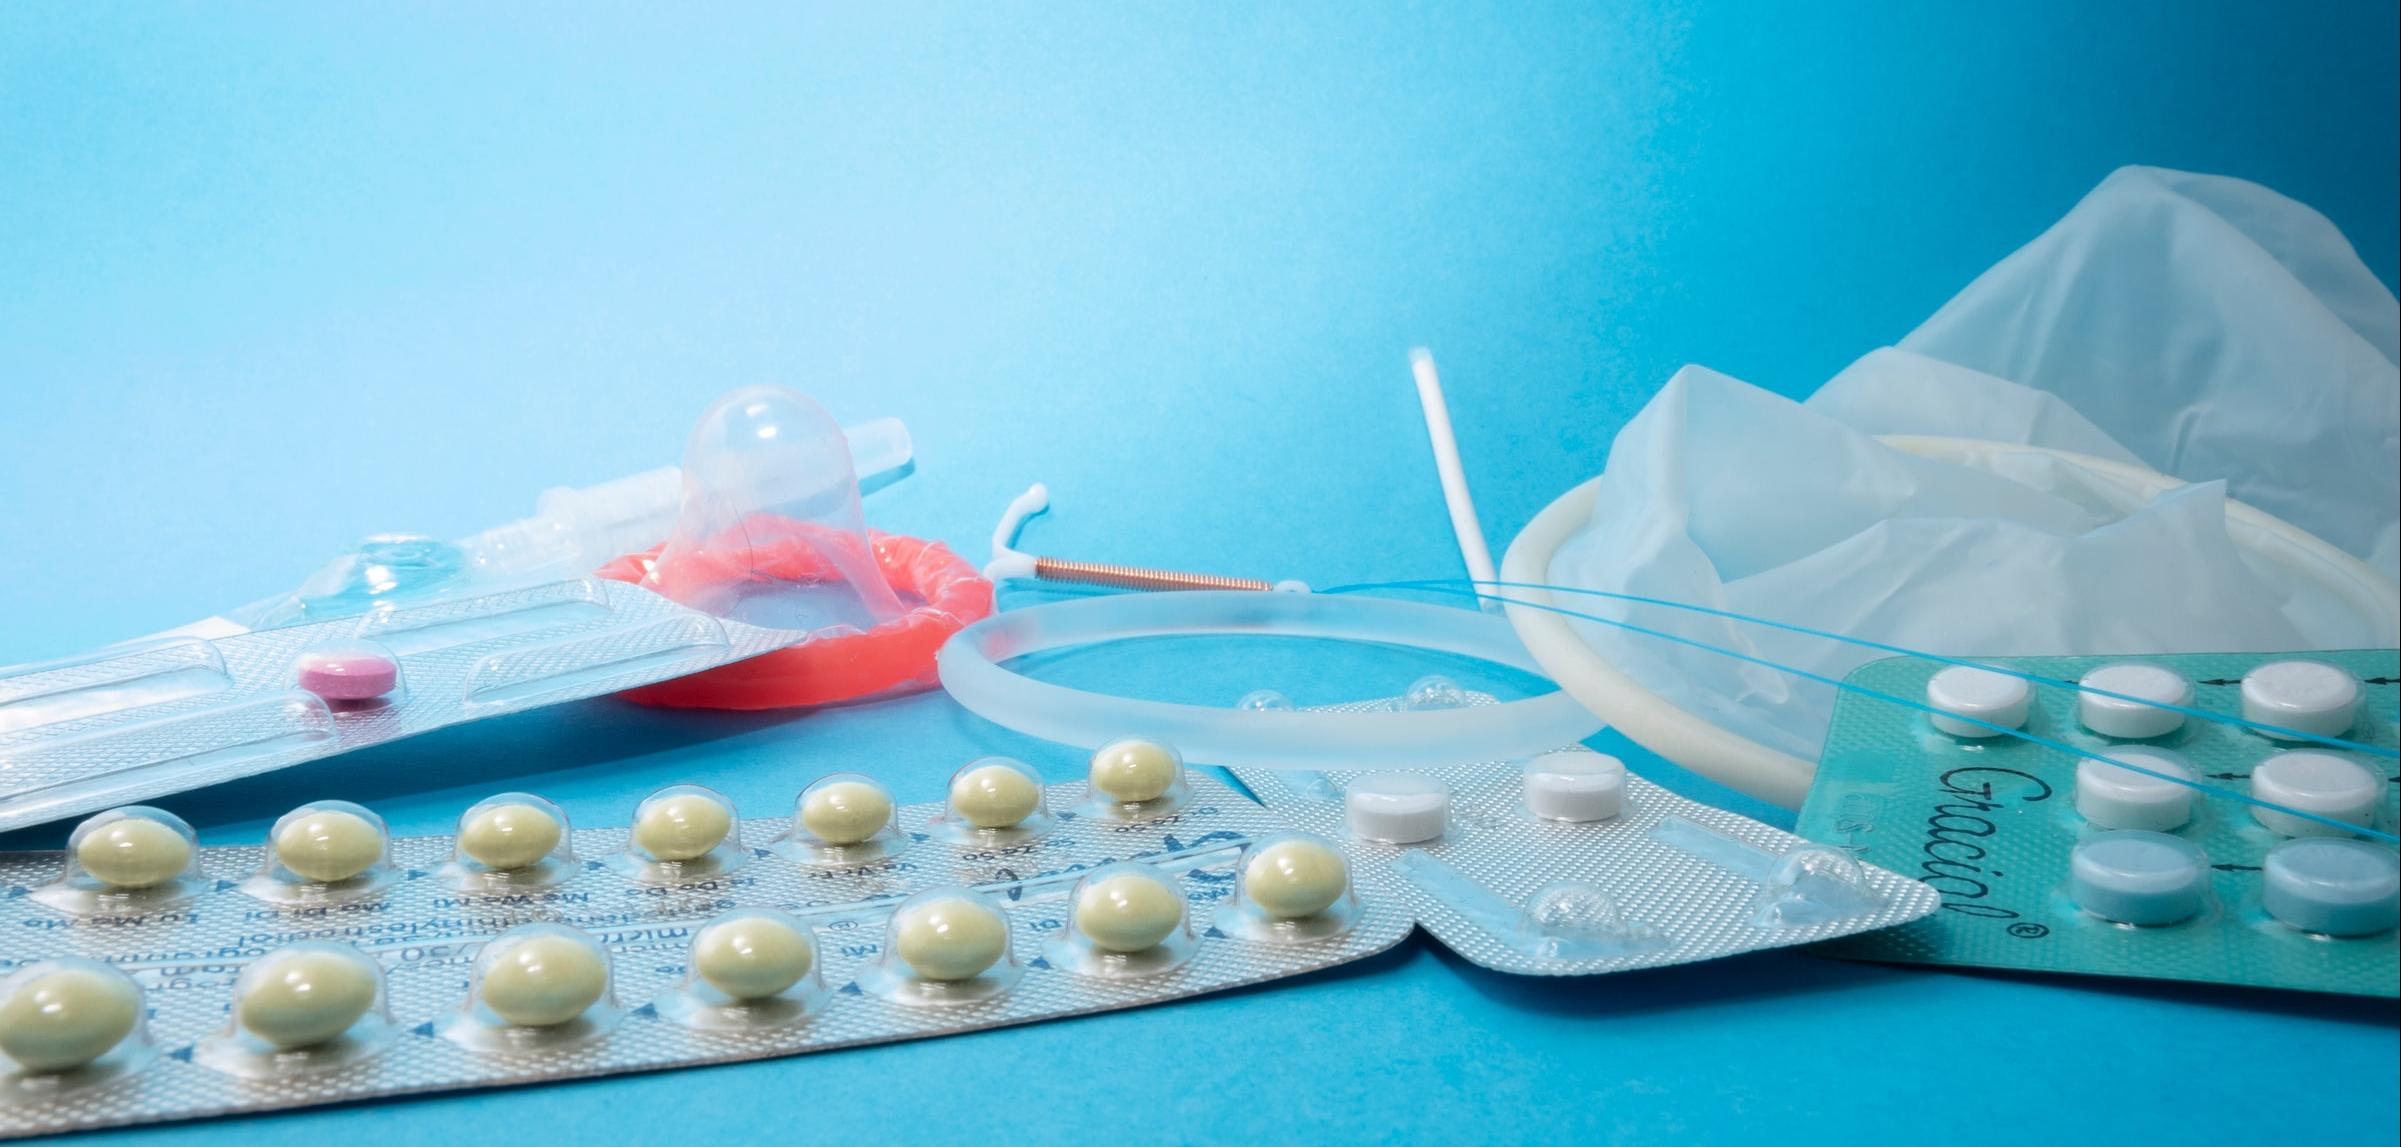 several birth control methods laid out on a blue background